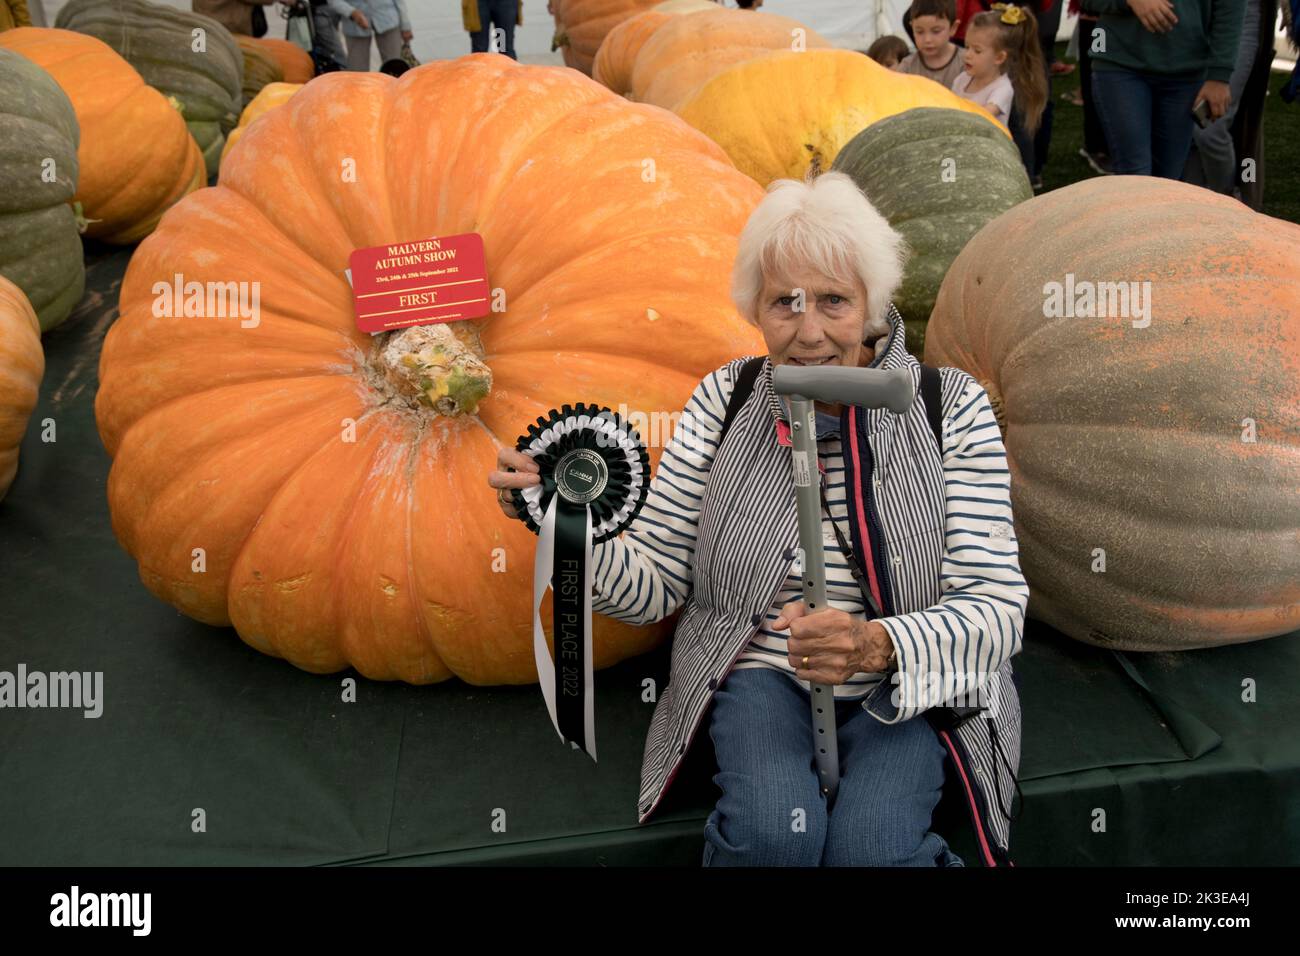 Woman sitting by giant pumpkins are some of the giant vegetables at Three Counties Autumn Show  Great Malvern, UK Stock Photo